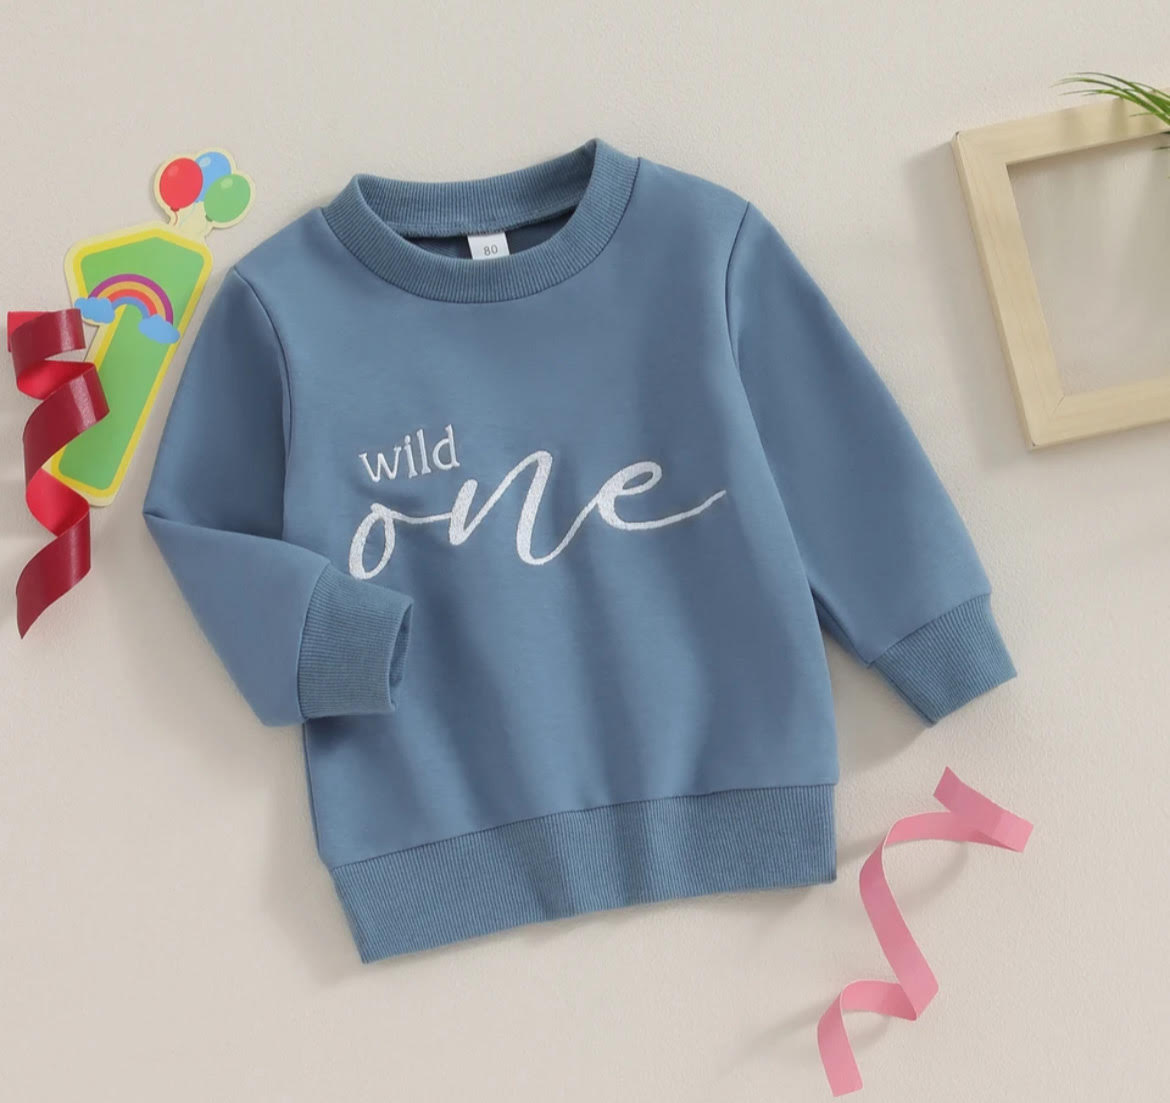 Wild One Kids Blue Crew Neck Sweater, Perfect 1st Birthday Gift, Wild Child Sweater, Baby Sweatshirt Party Outfit